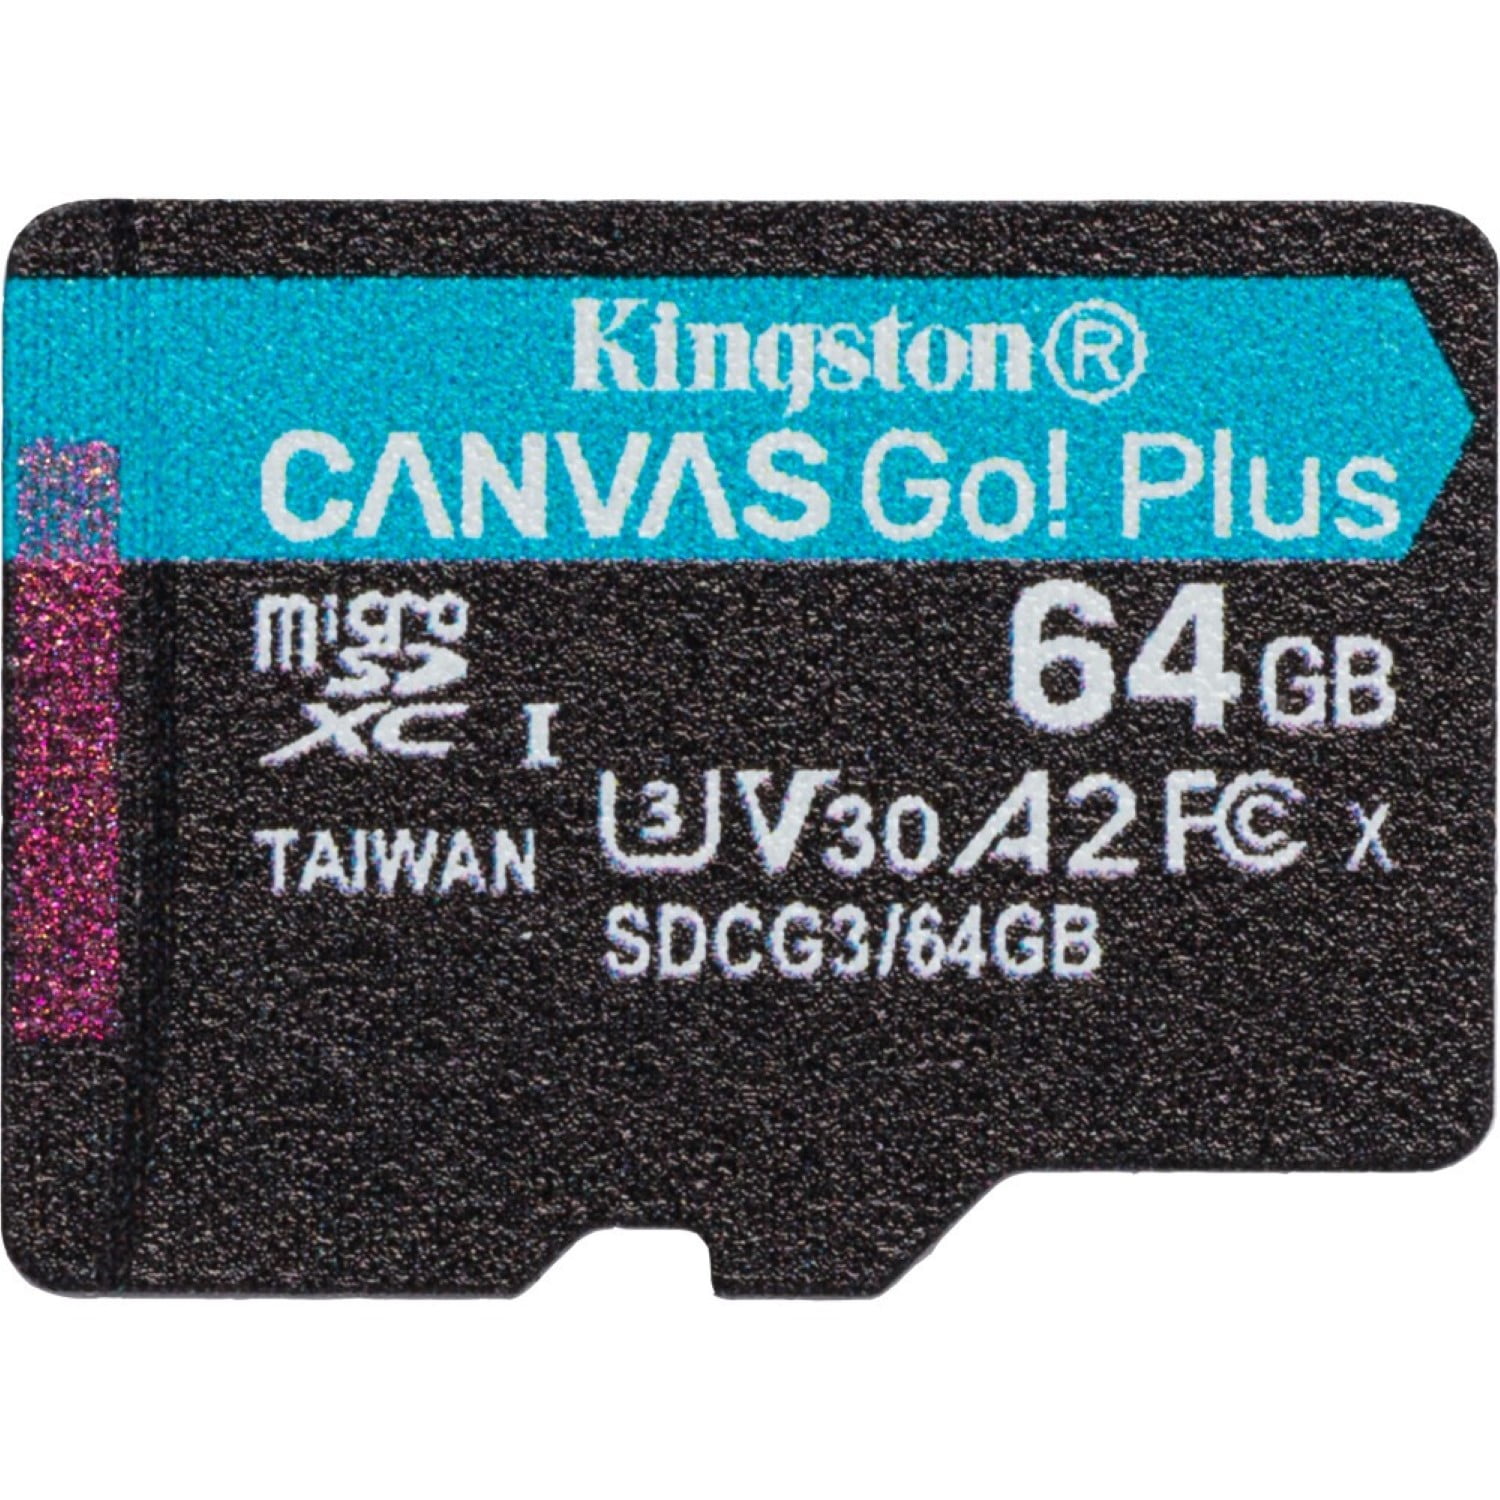 Kingston 64GB microSDXC Canvas Go Plus 170MB/s Read UHS-I Class 10 U3 V30 A2/A1  Memory Card without Adapter SDCG3/64GBSP 